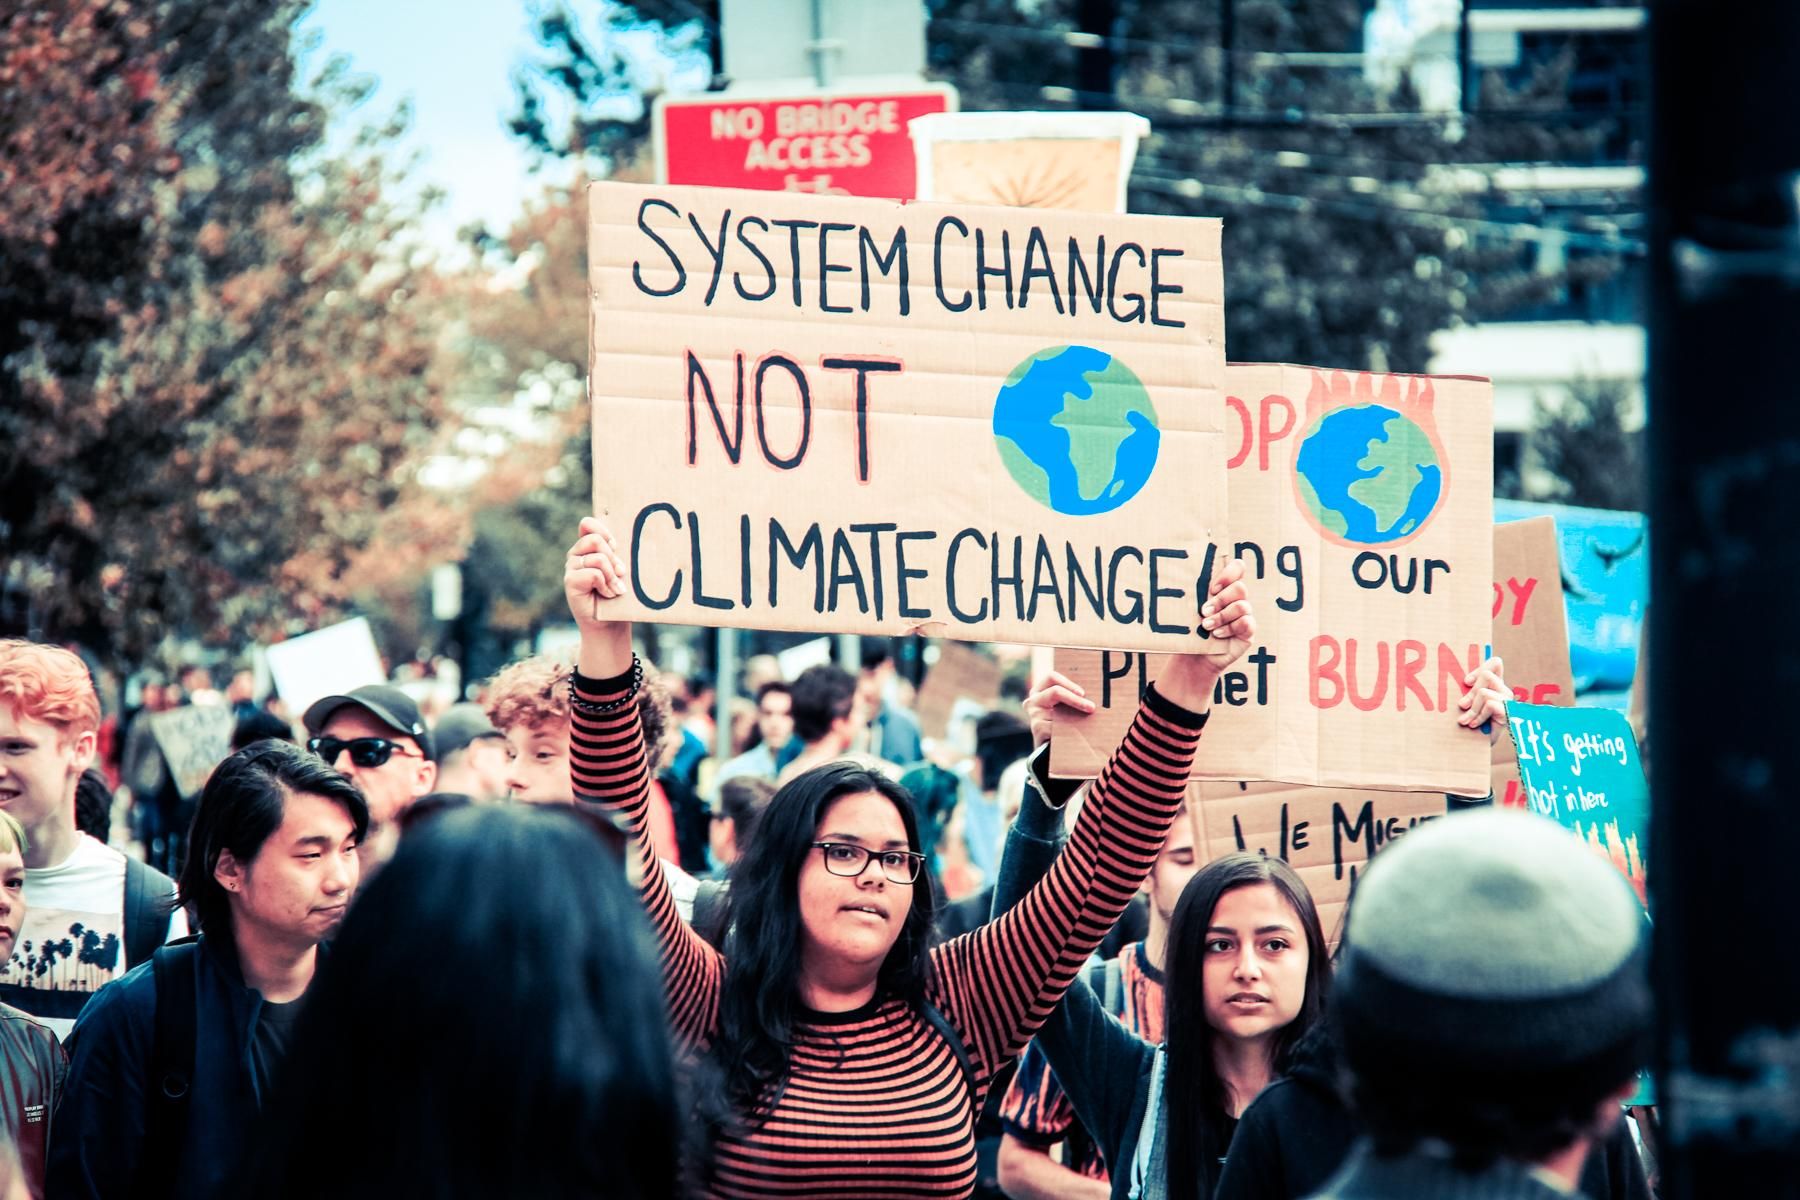 The ongoing global health, economic, and climate crises have revealed what racial justice advocates have known for a long time: our economic system is fundamentally and profoundly broken. (Photo: Chris-Yakimov-via-Flickr)